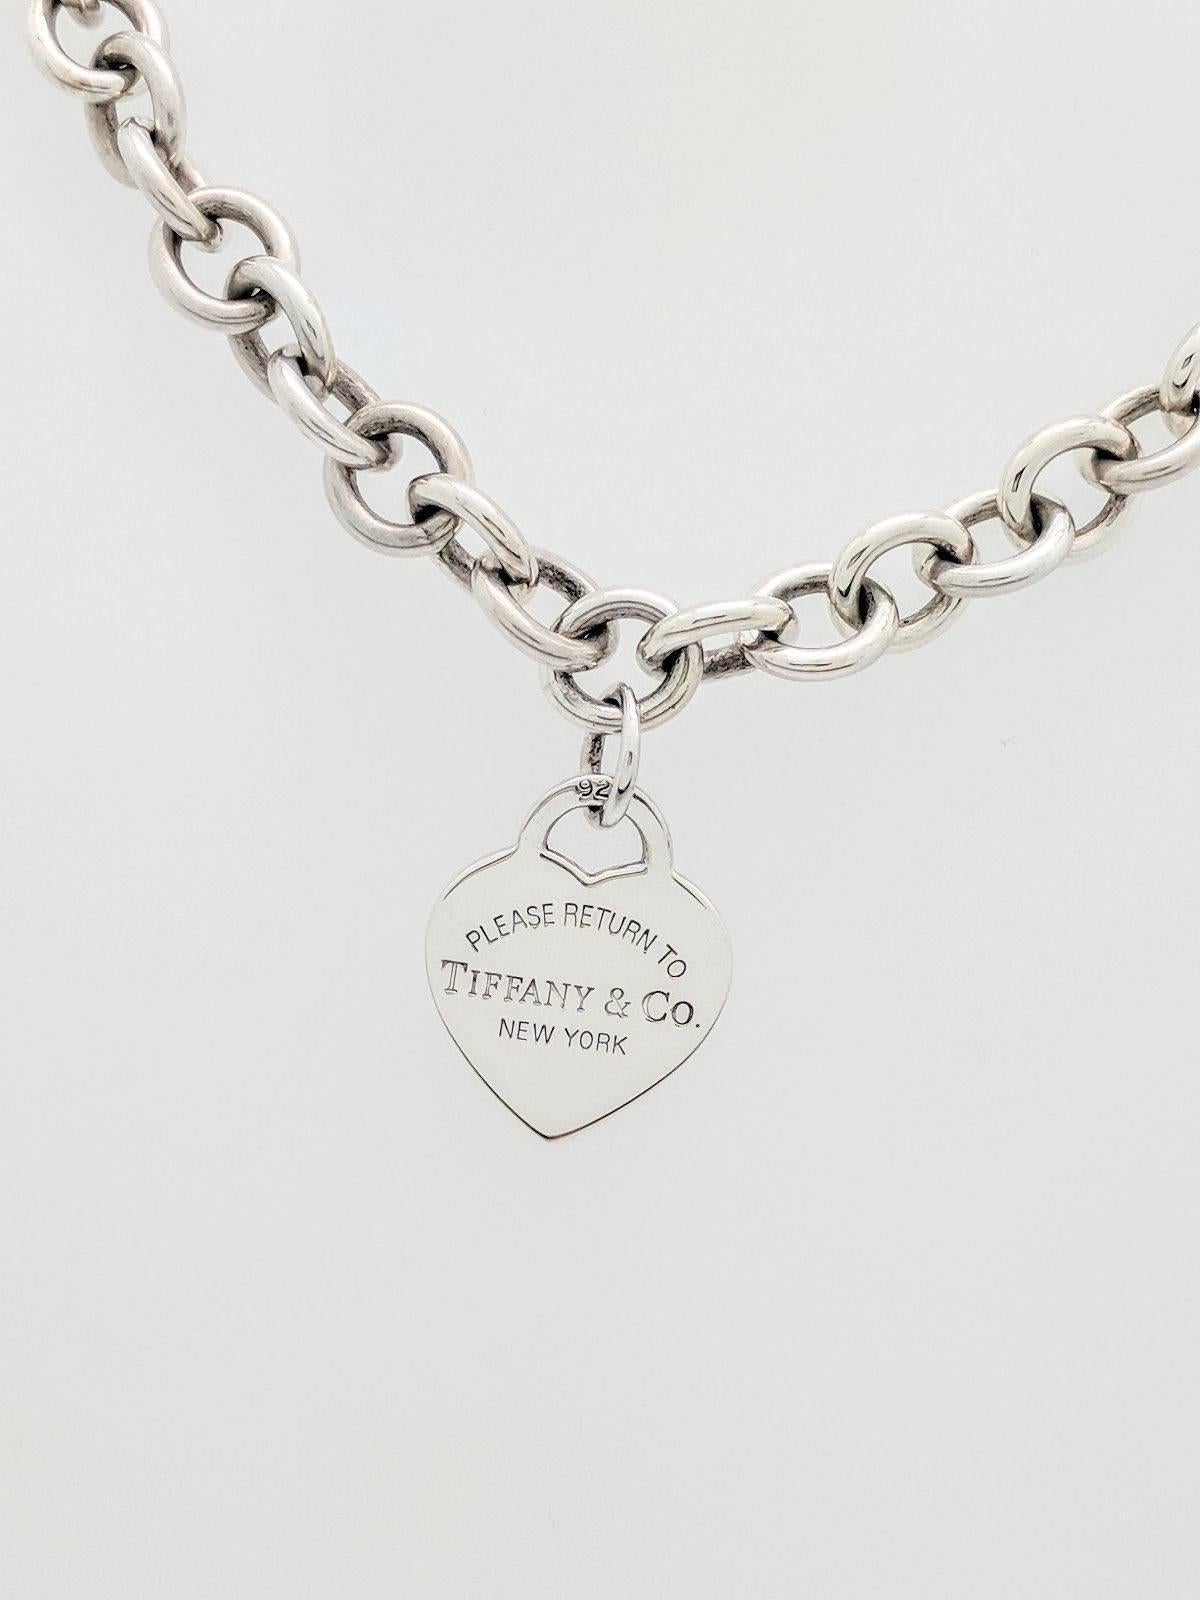 Authentic Tiffany & Co. Sterling Silver Please Return To Heart Necklace 16